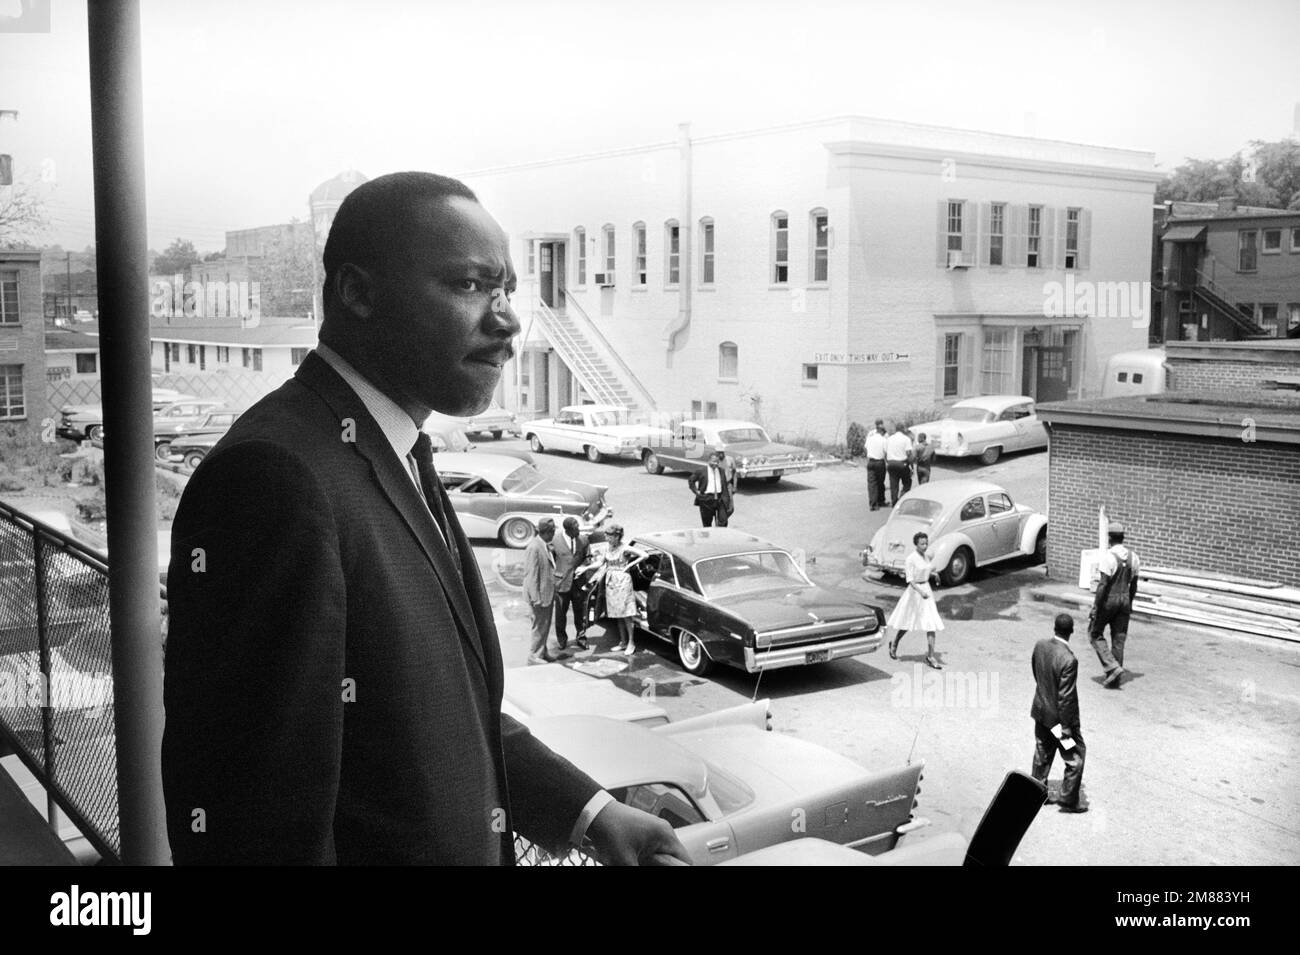 Martin Luther King  standing on balcony at A. G. Gaston Motel overlooking parking lot, during Birmingham Campaign, Birmingham, Alabama, USA, Marion S. Trikosko, US News & World Report Magazine Collection, May 16, 1963 Stock Photo